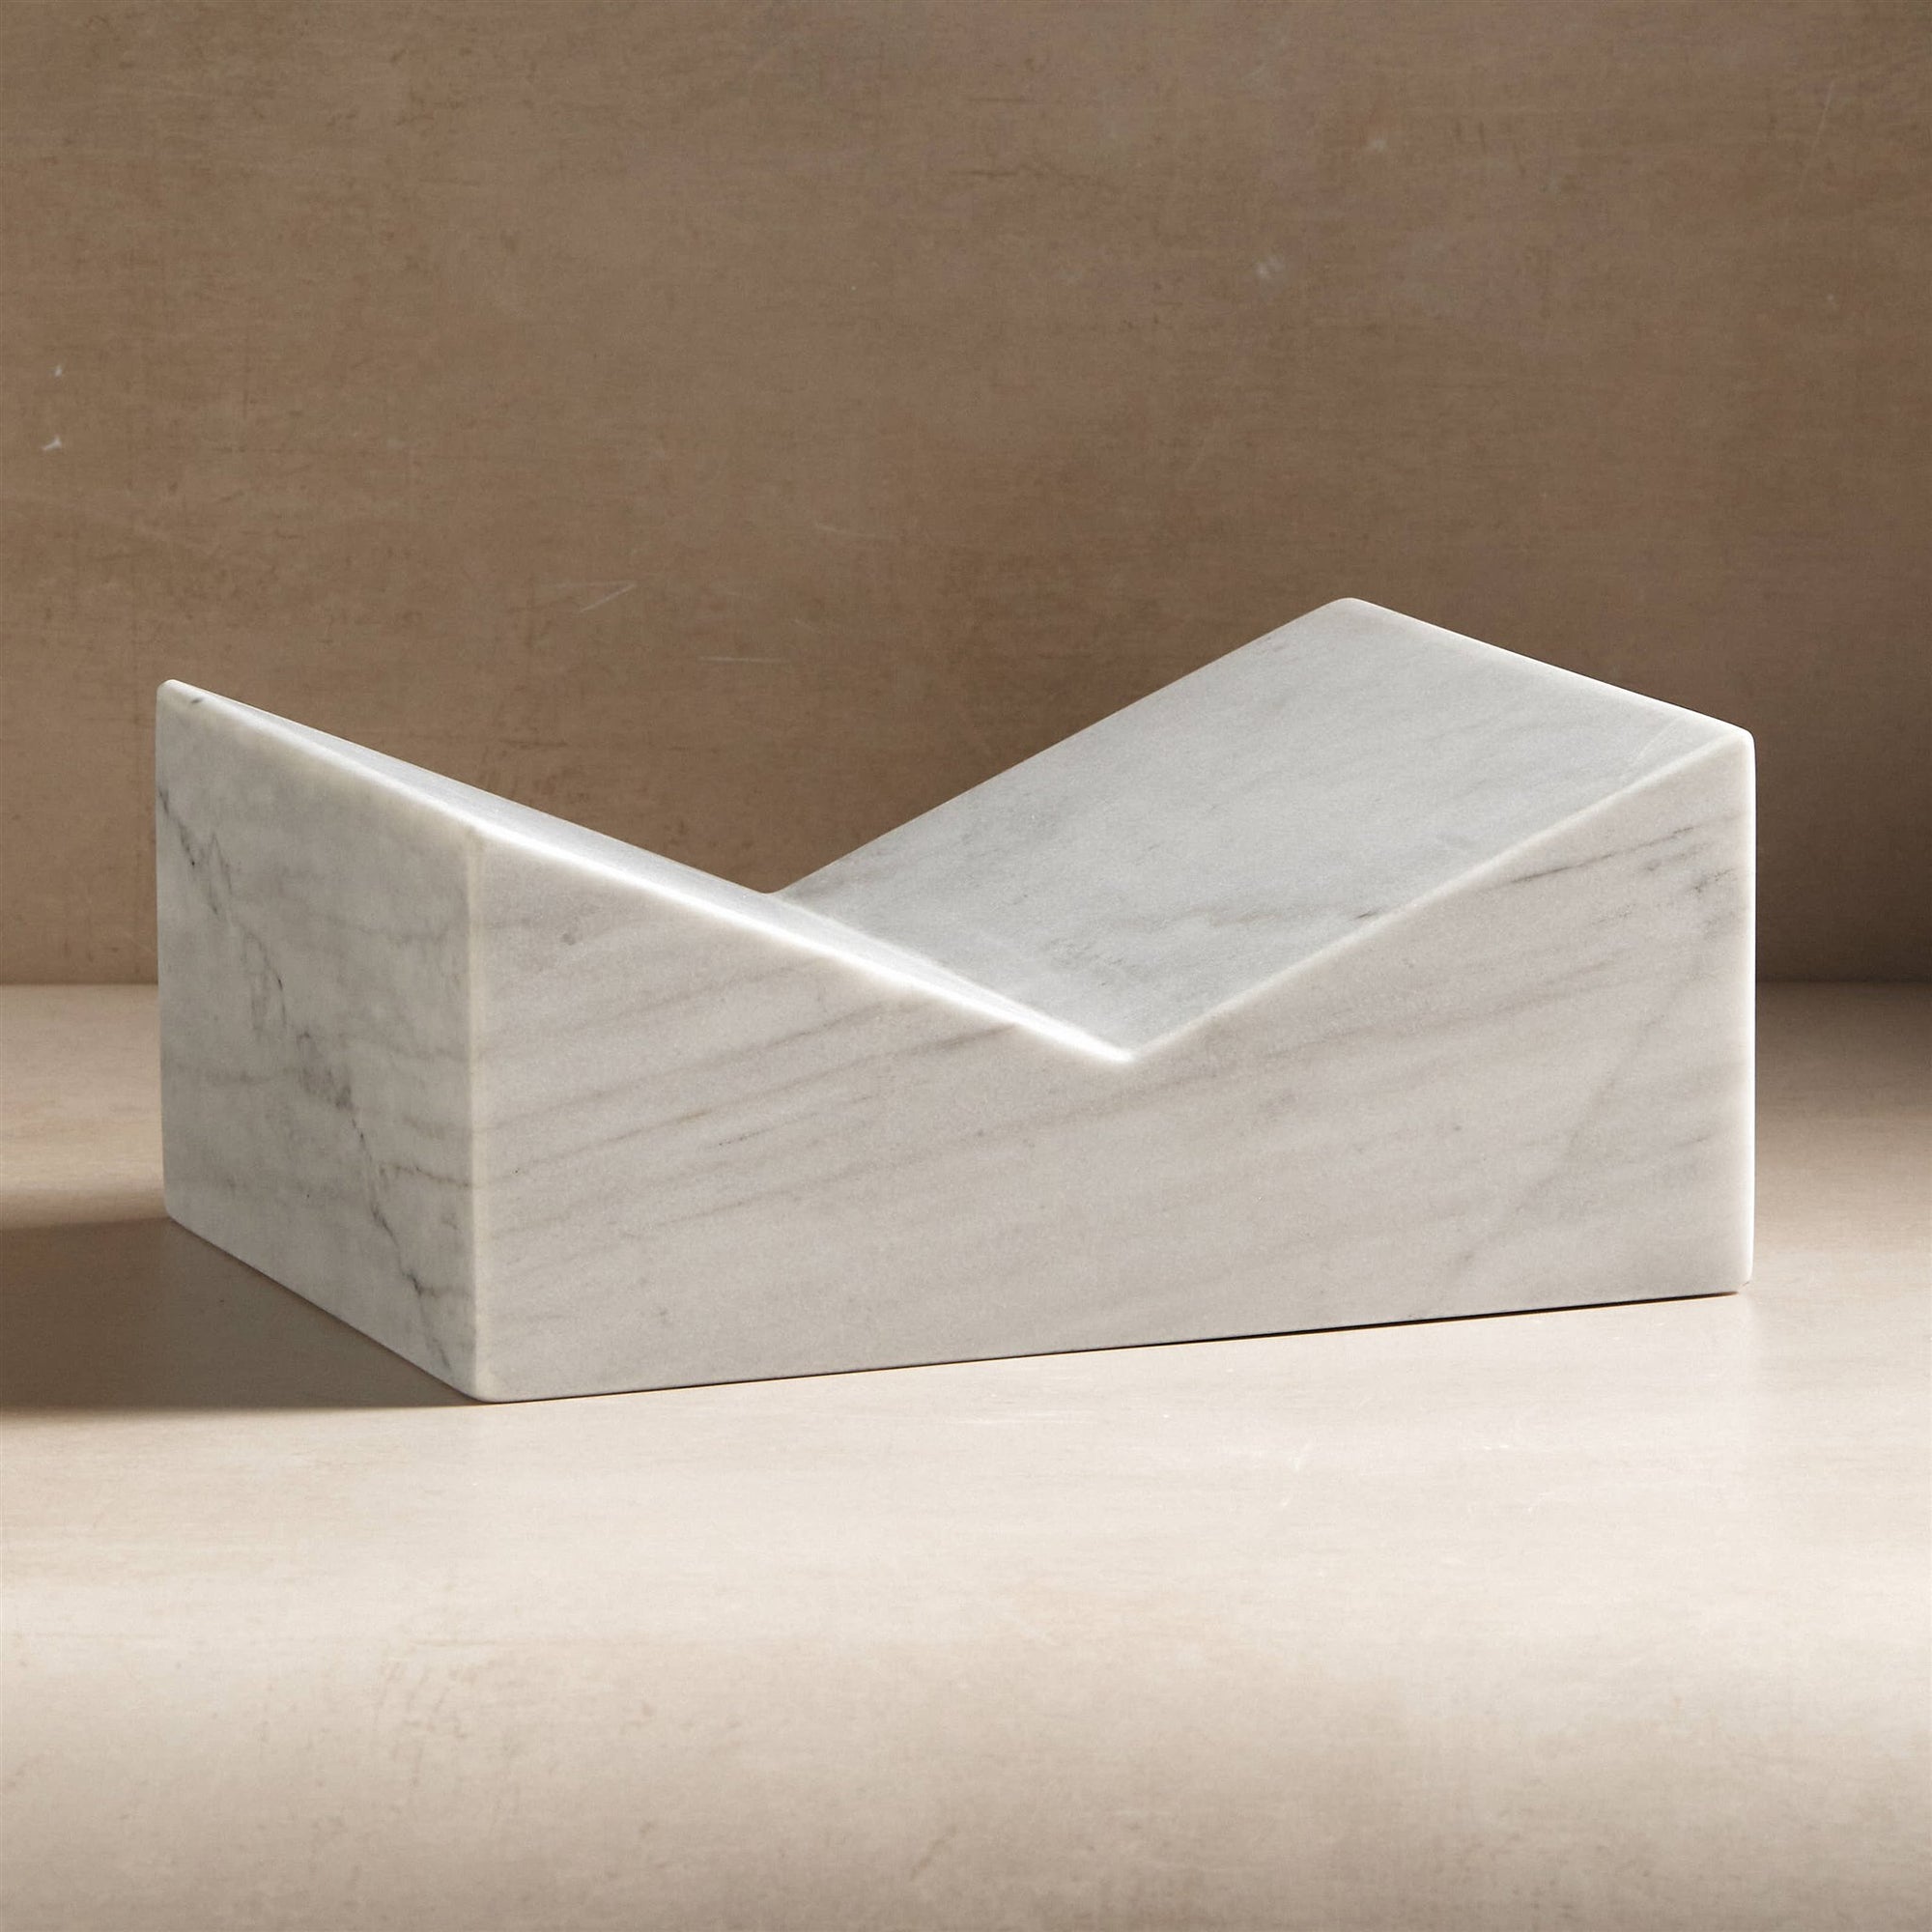 large stone bookstand made from white marble for holding books